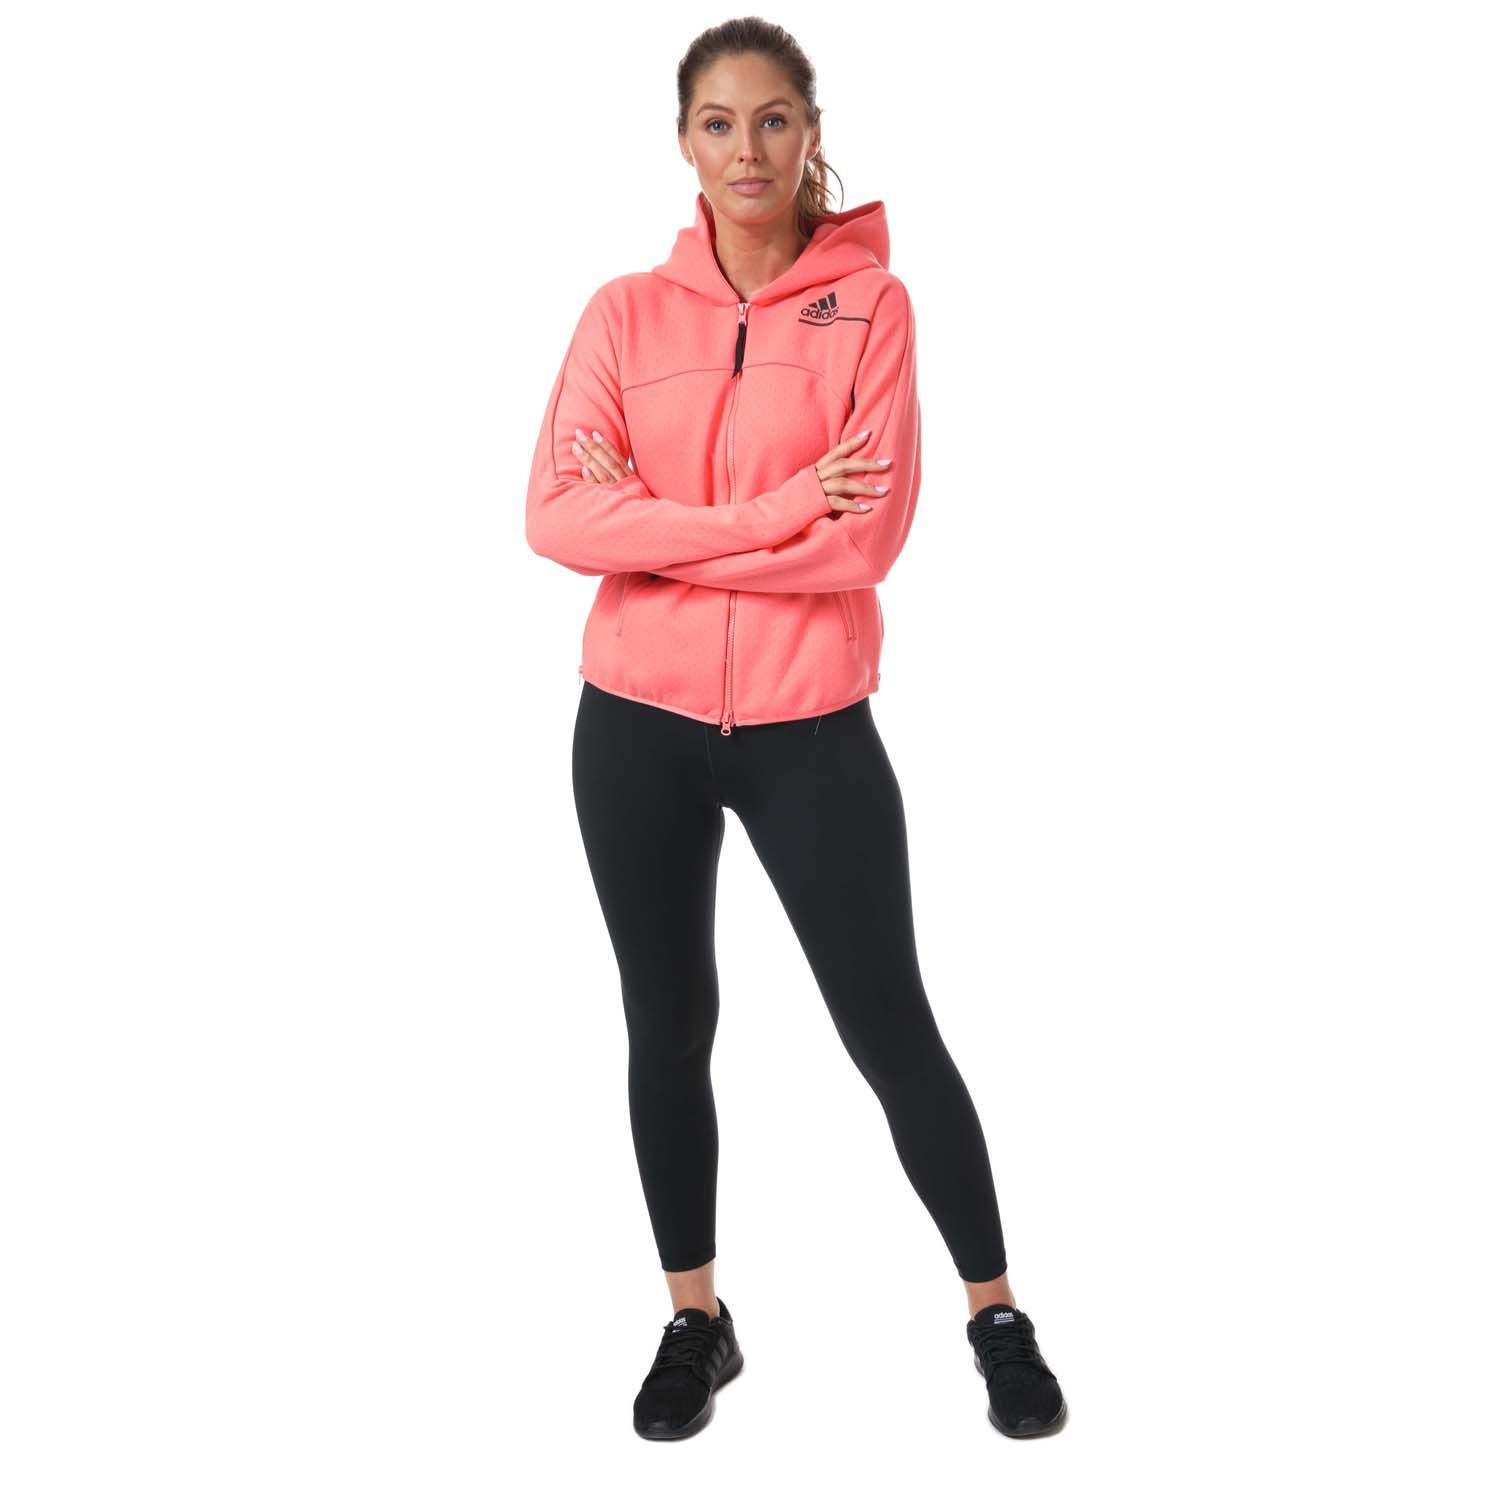 Womens adidas Z.N.E. Zip Hoody in coral.-Hooded jacket.- Zip fastening.- Side zip pockets.- Thumbholes.- Relaxed fit.- Body: 60% Cotton  40% Polyester (Recycled). - Ref: GM3280